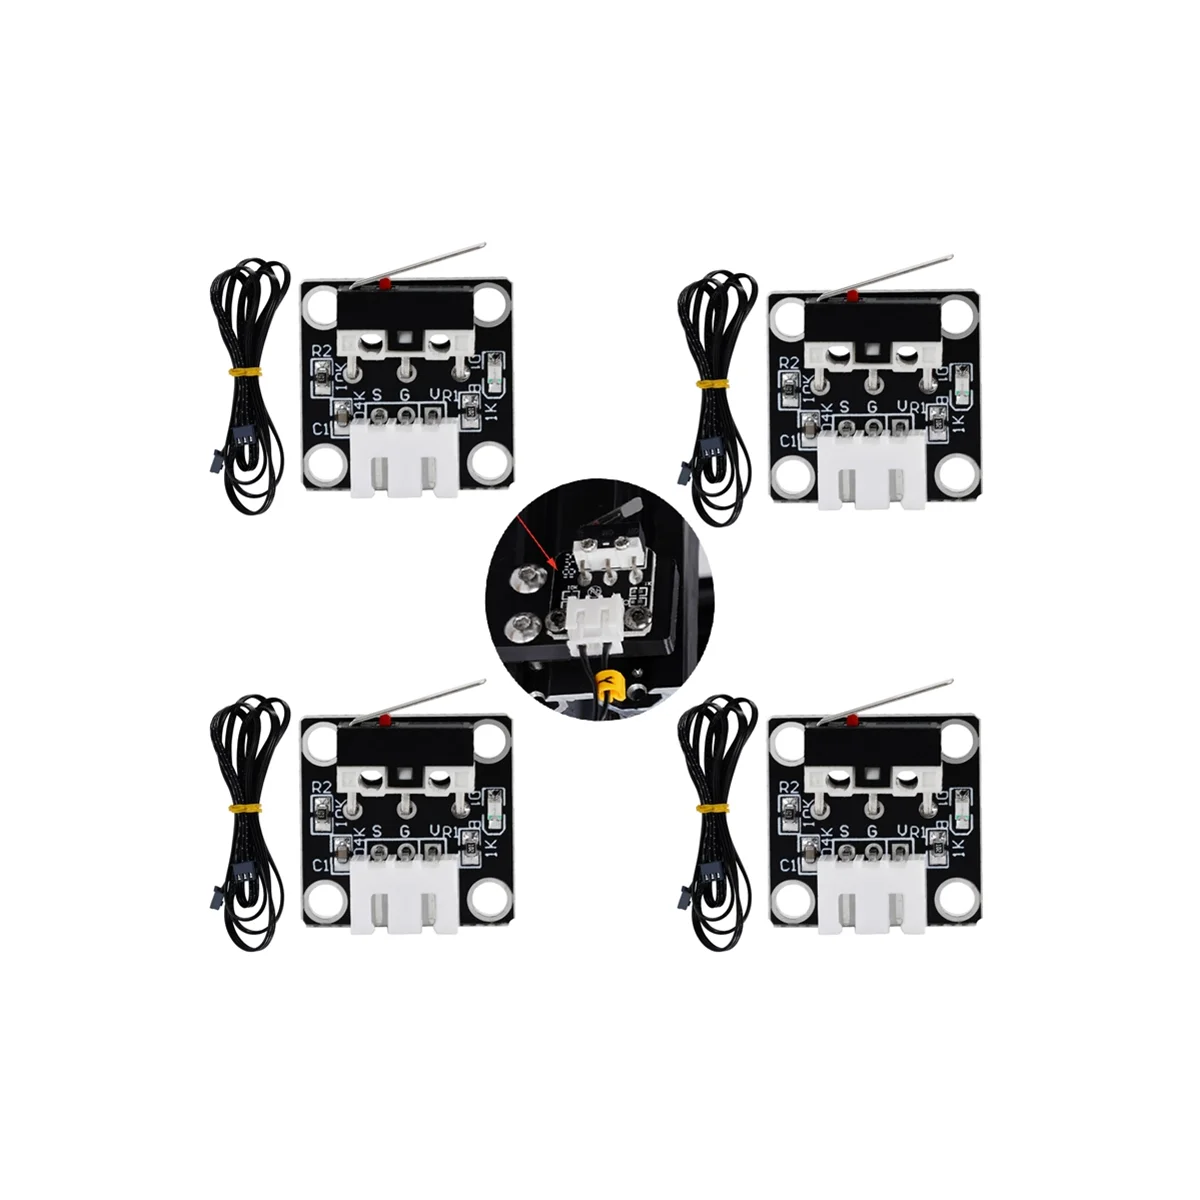 

4Sets XYZ Axis Mini Limit Switch Mechanical Switch End Stop 3Pin 3D Printer Parts for Creality CR10 CR10S Ender3